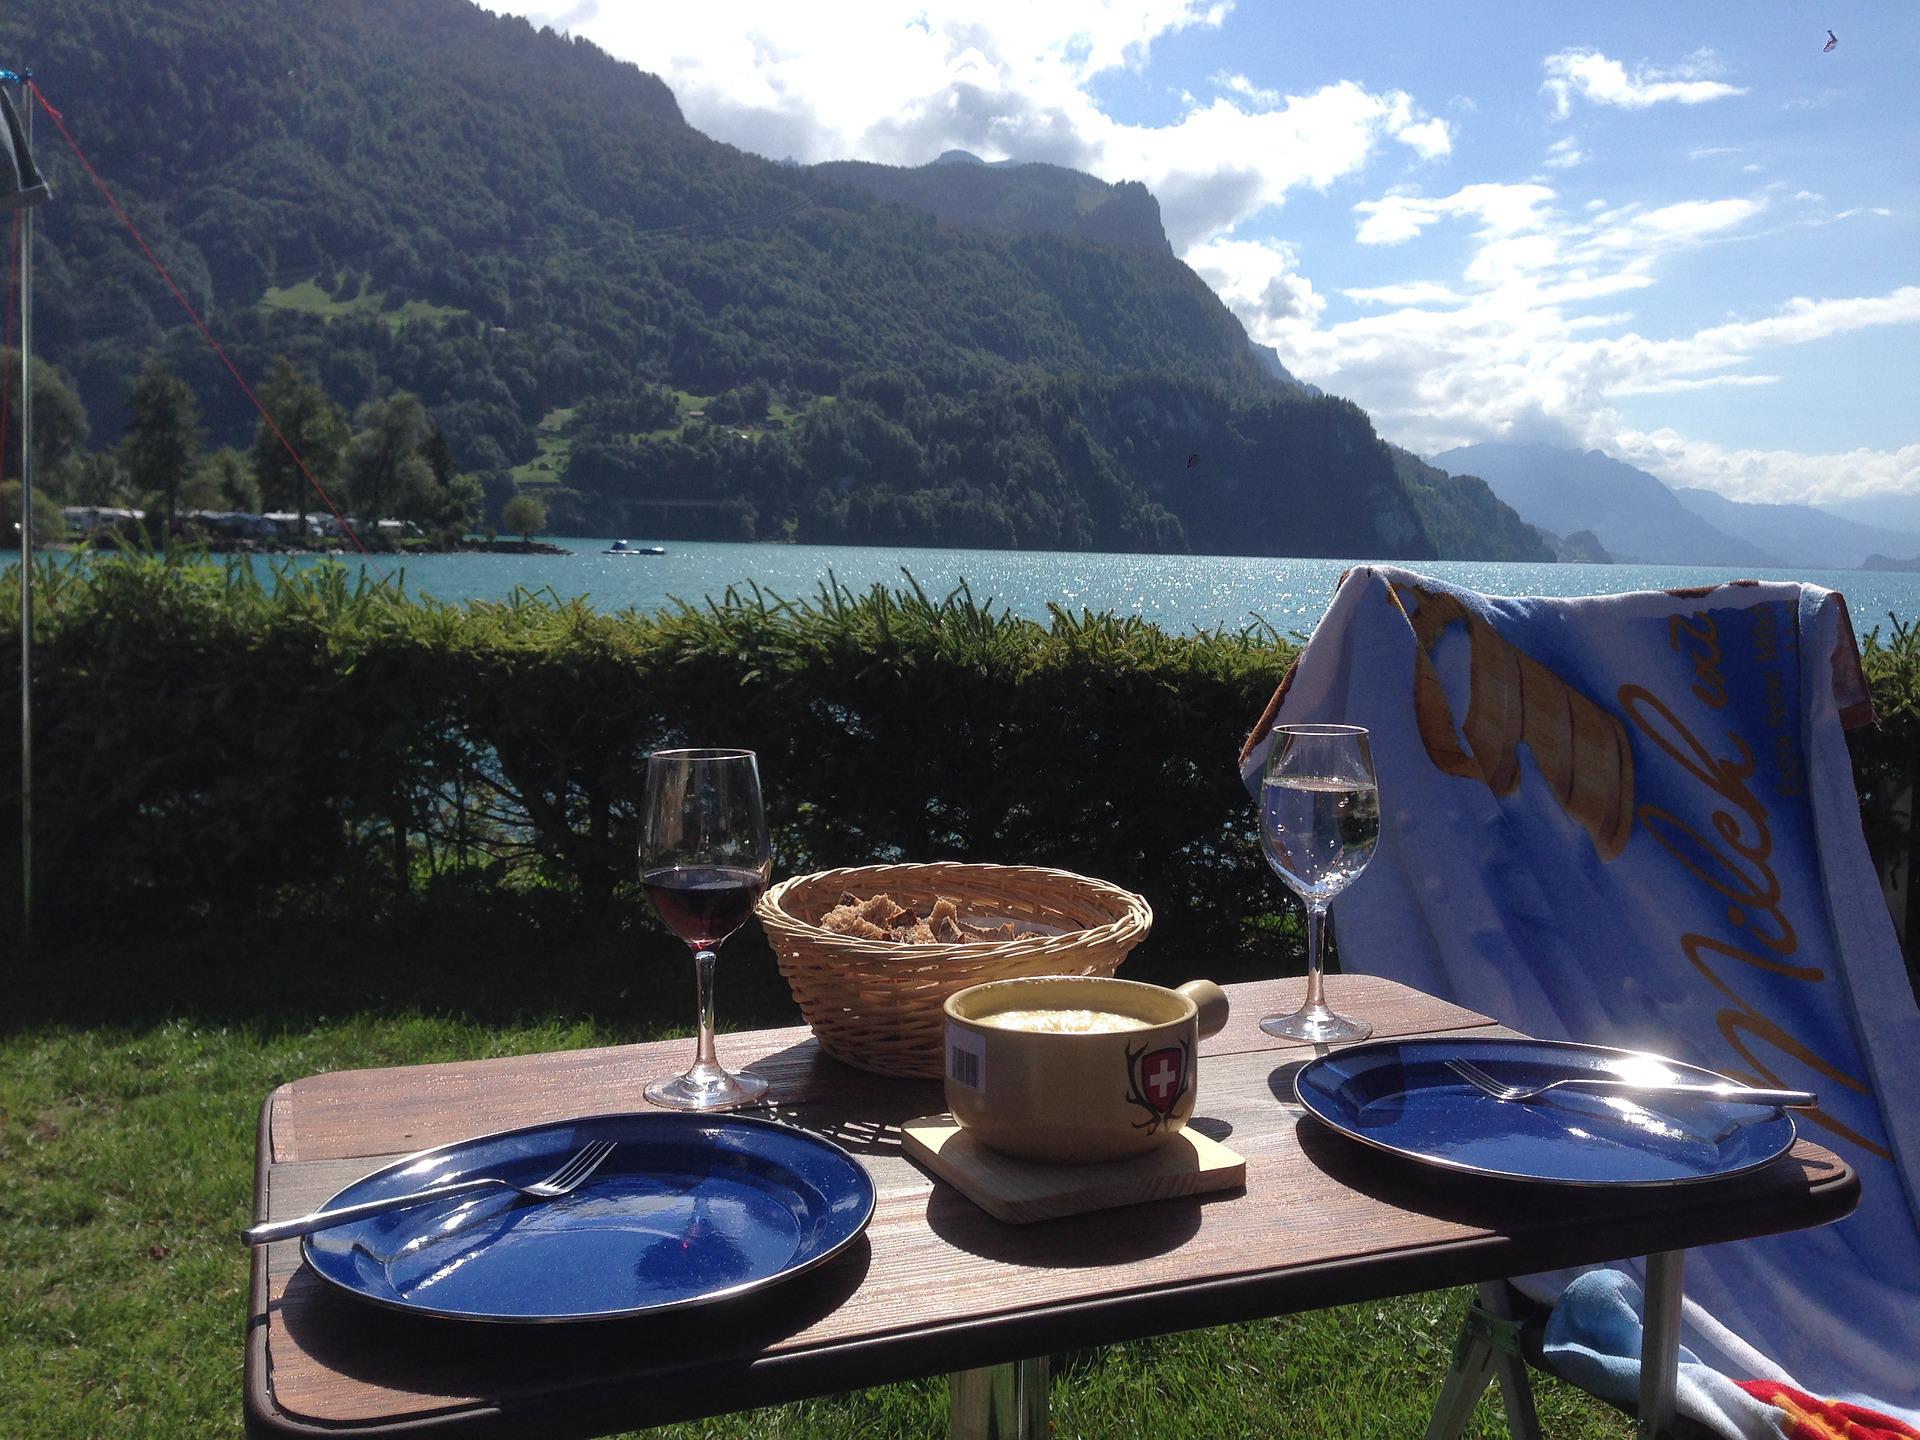 Blog - The Ultimate Foodie Guide: Classic French Mountain Dishes You Need to Try